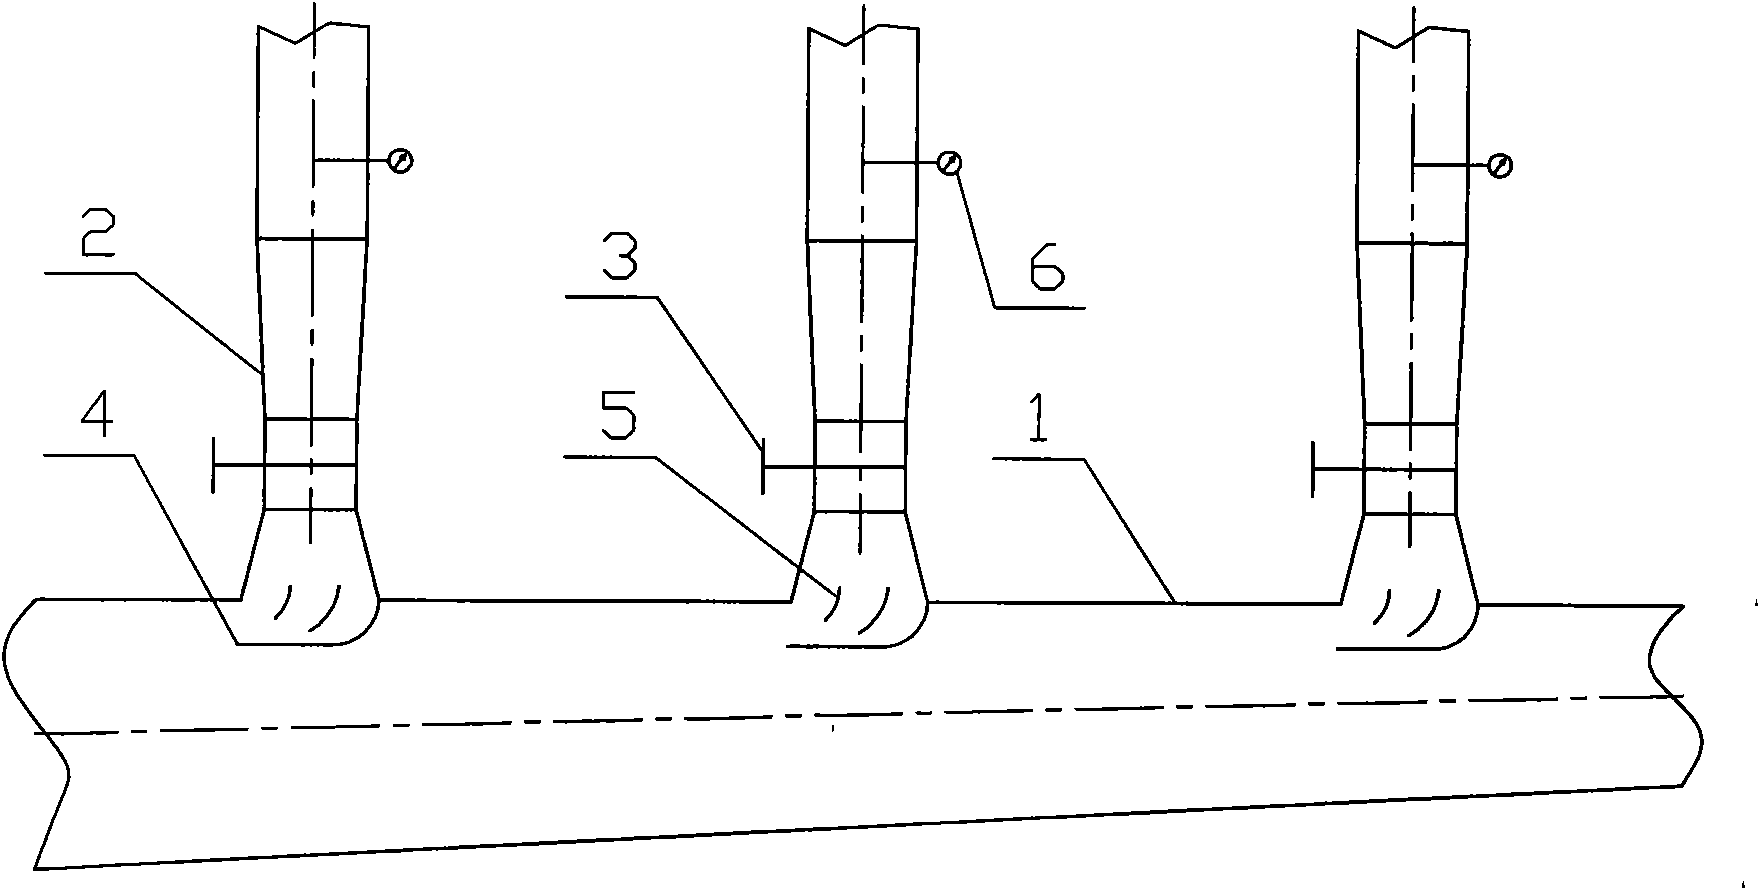 Pipeline structure for equally distributing purifying smoke pipe air quantity